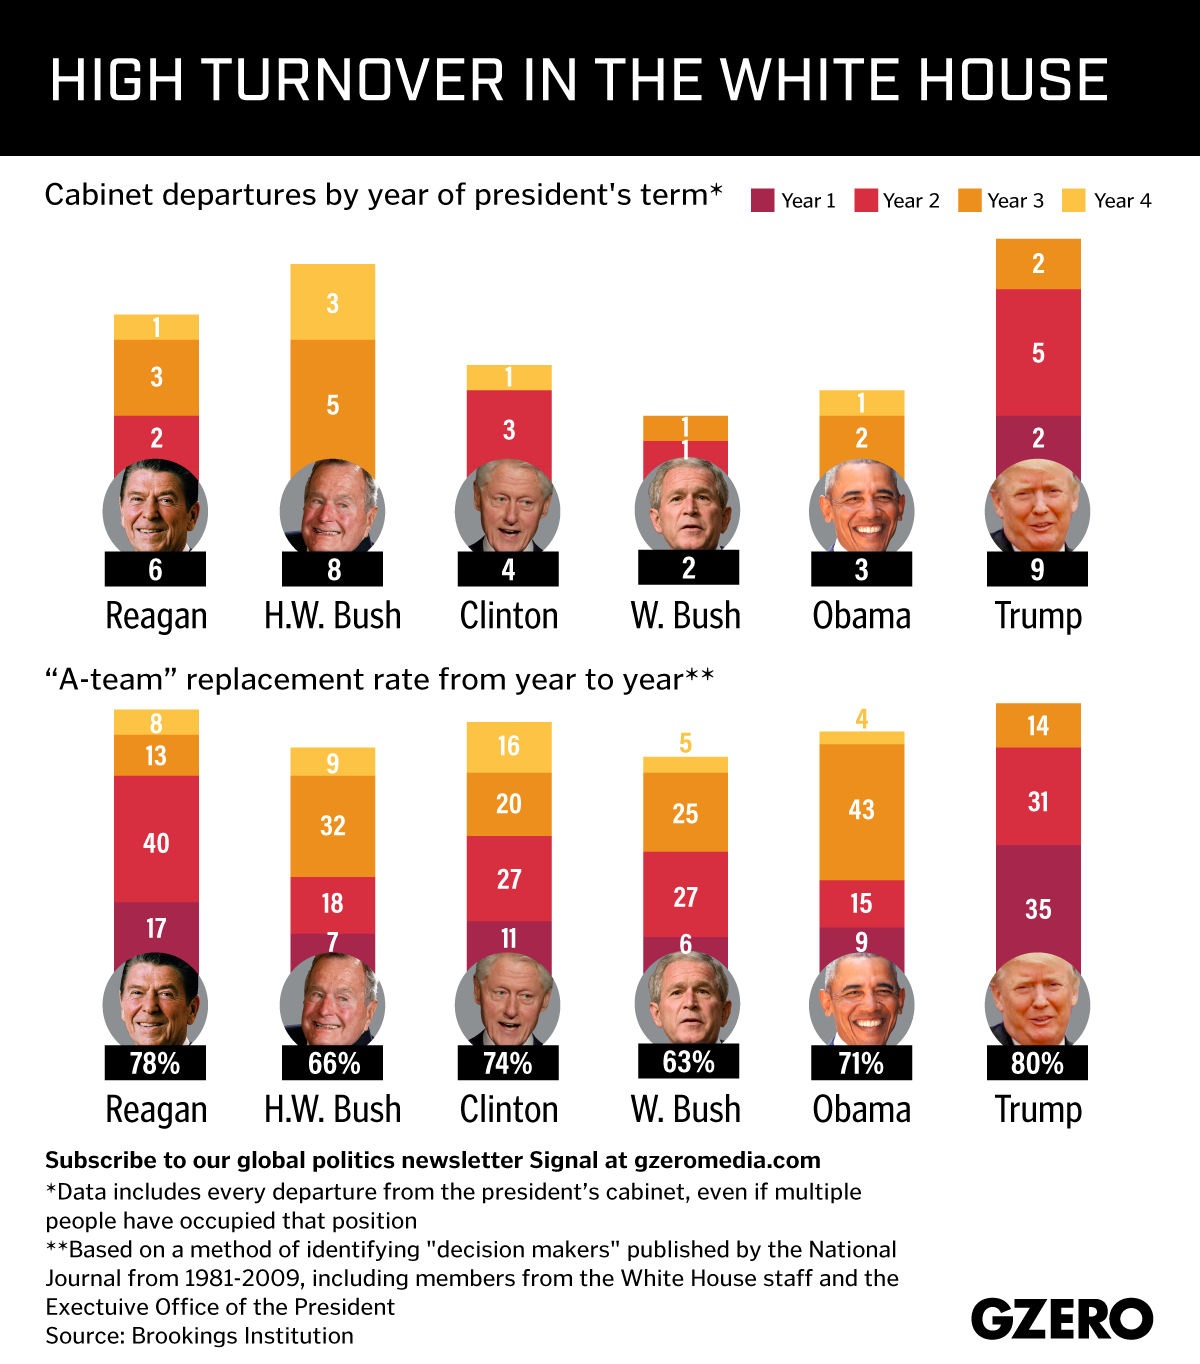 Graphic Truth: High Turnover in the White House